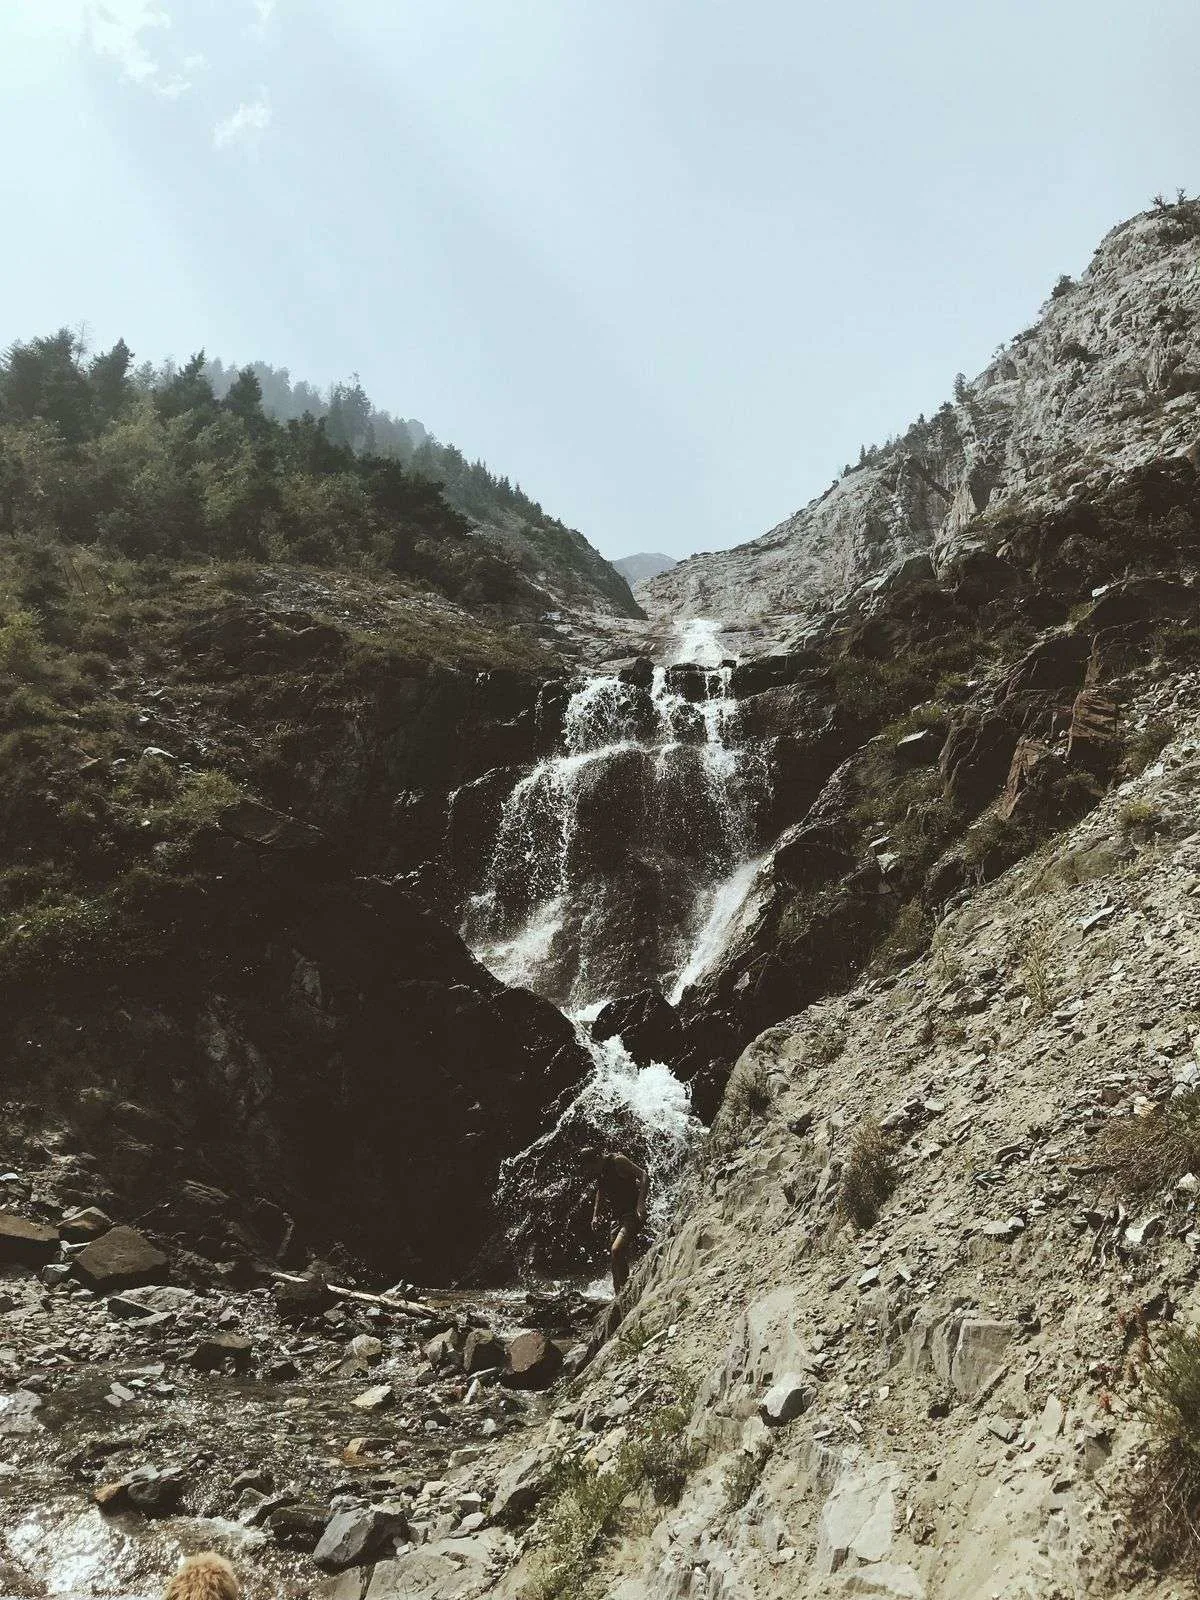 Don't forget to add Hurricane Creek Trail to your list of Oregon waterfall hikes.